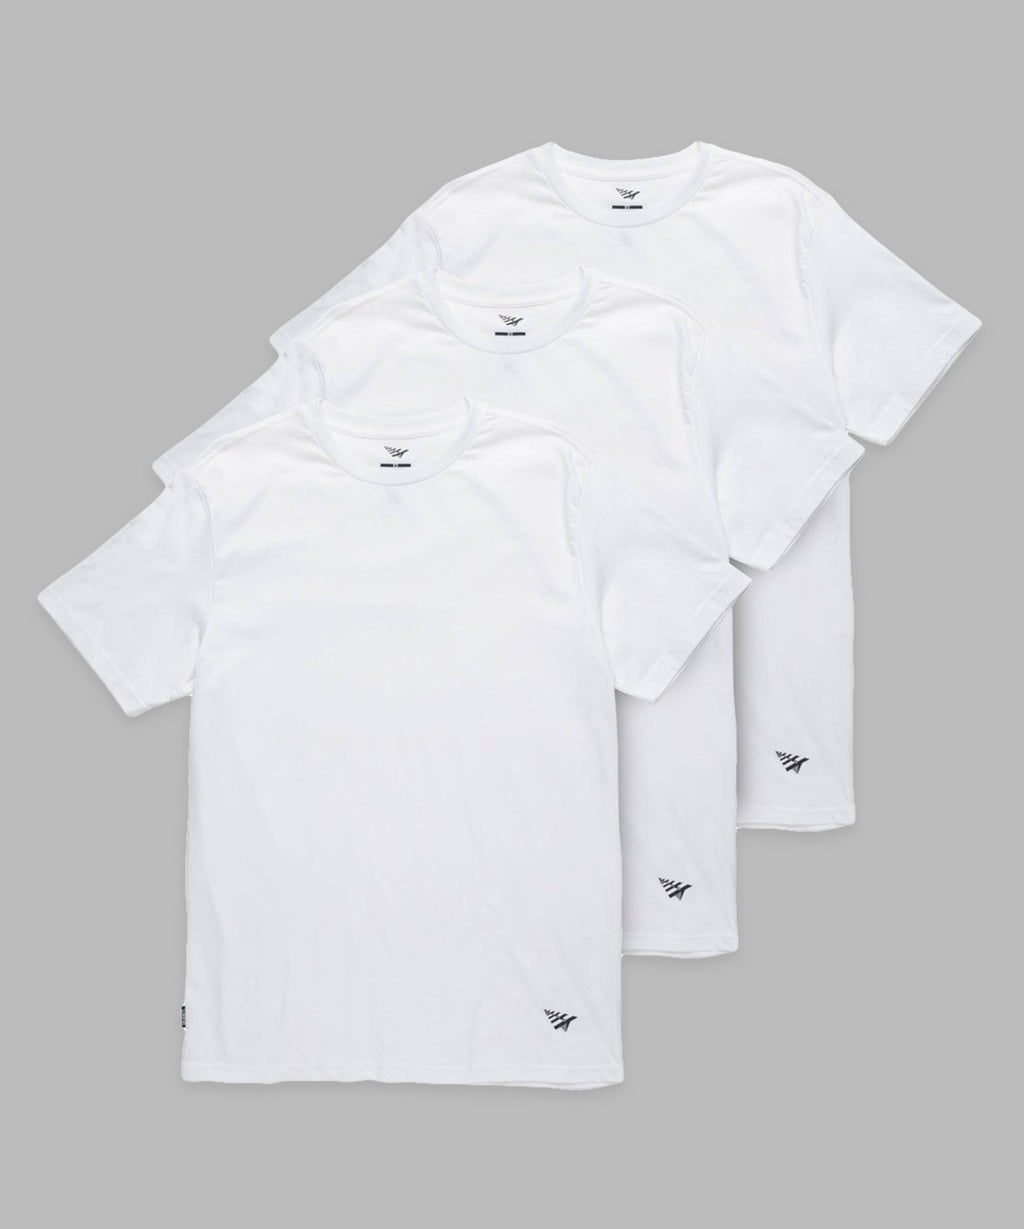 Planes Essential 3 pack tees in white